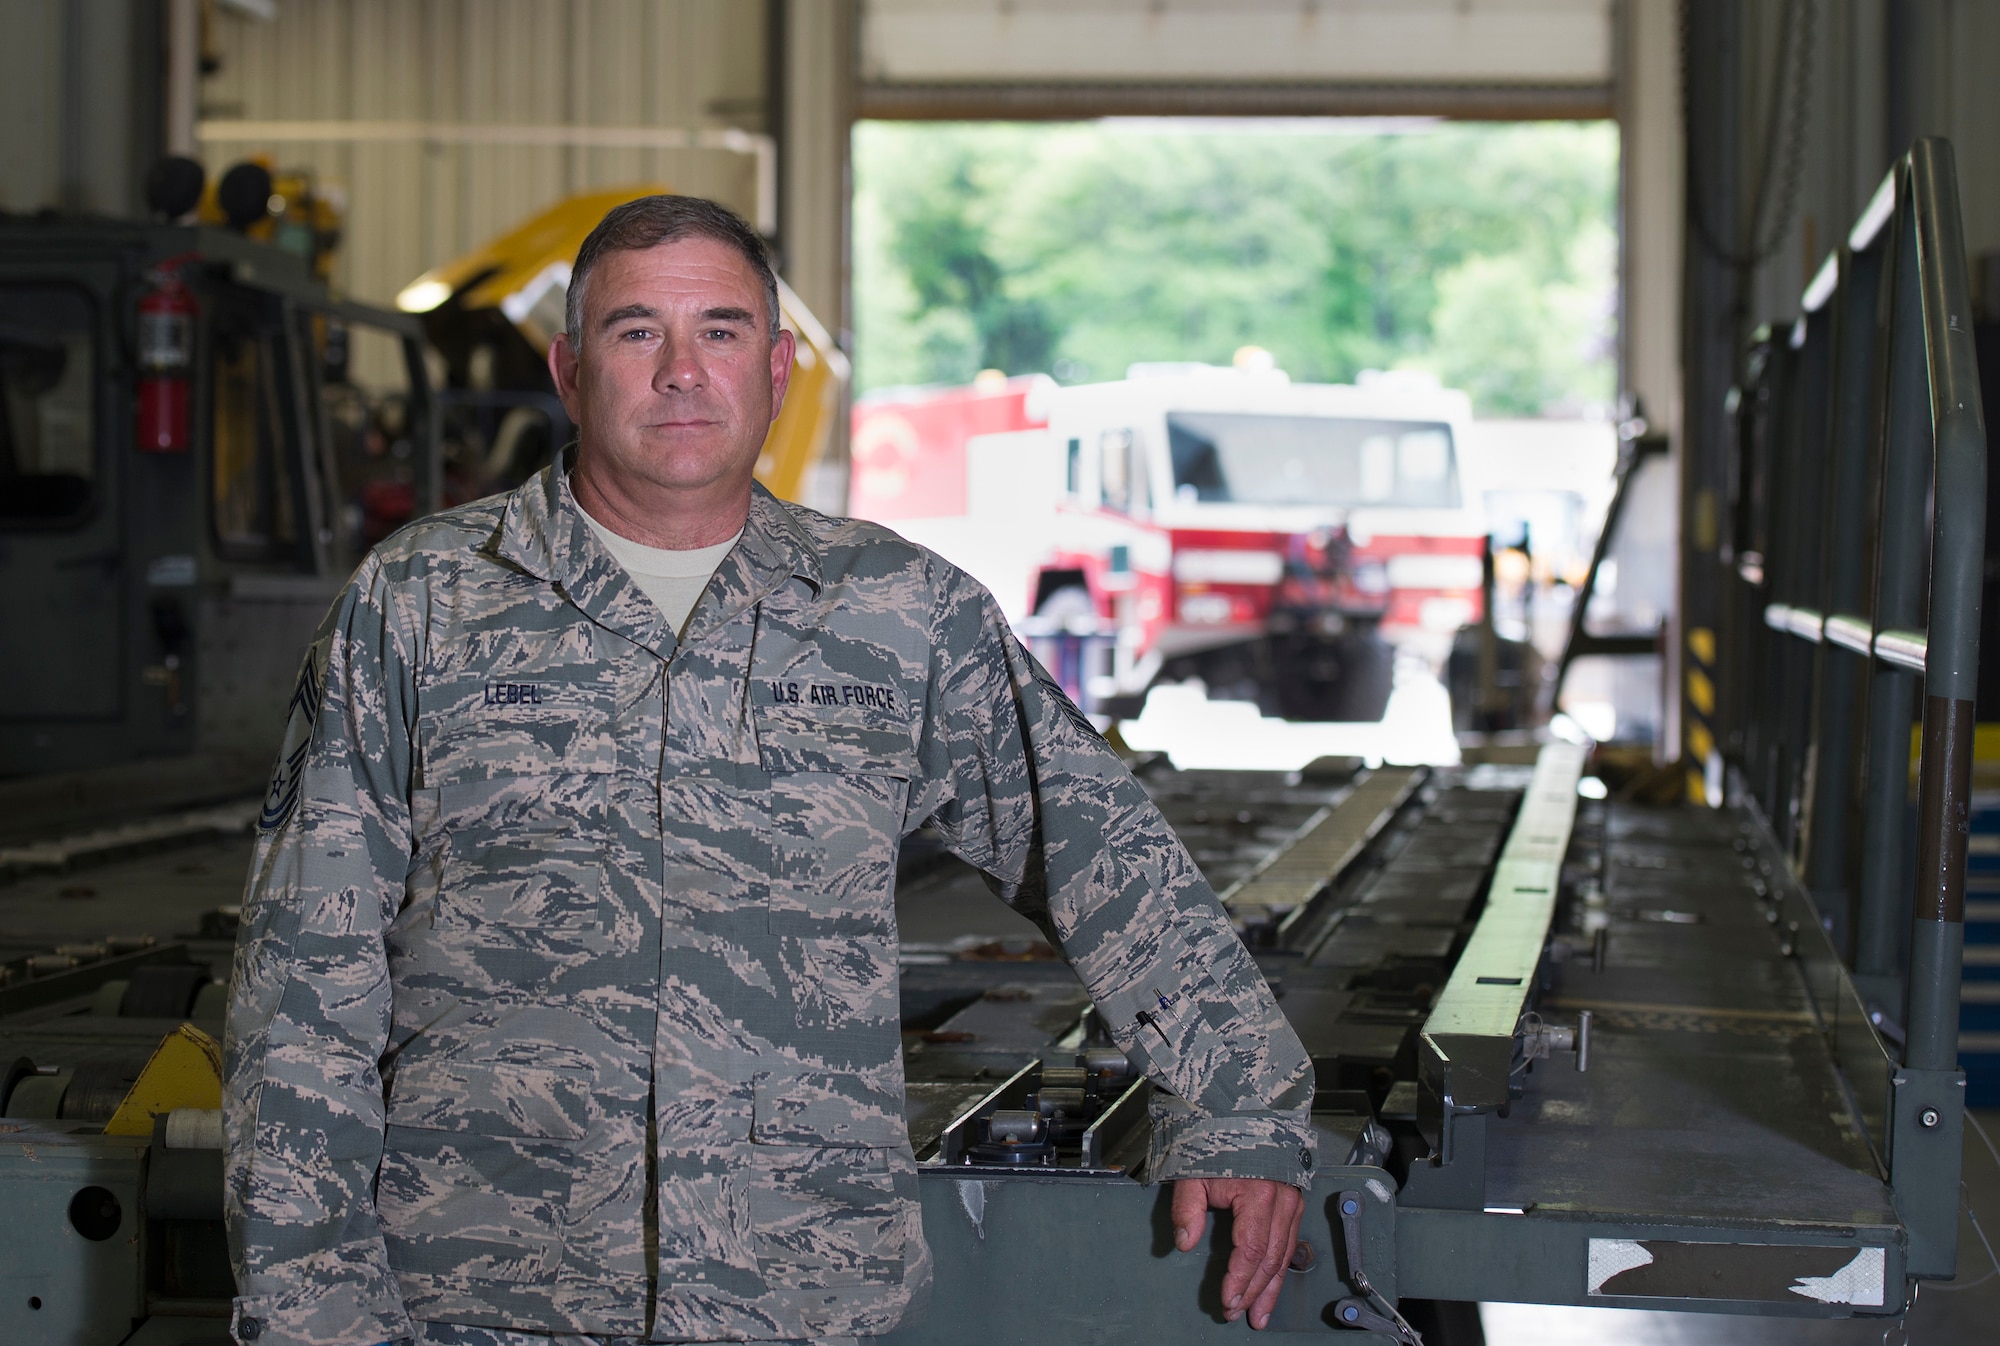 Chief Master Sgt. Anthony M. Lebel, the vehicle fleet manager assigned to the 157th Mission Support Group, poses for a portrait on July 26, 2018 at Pease Air National Guard Base, N.H. Lebel is scheduled to retire on August 11, 2018, after more than 35 years of service. (N.H. Air National Guard photo by Staff Sgt. Kayla White)